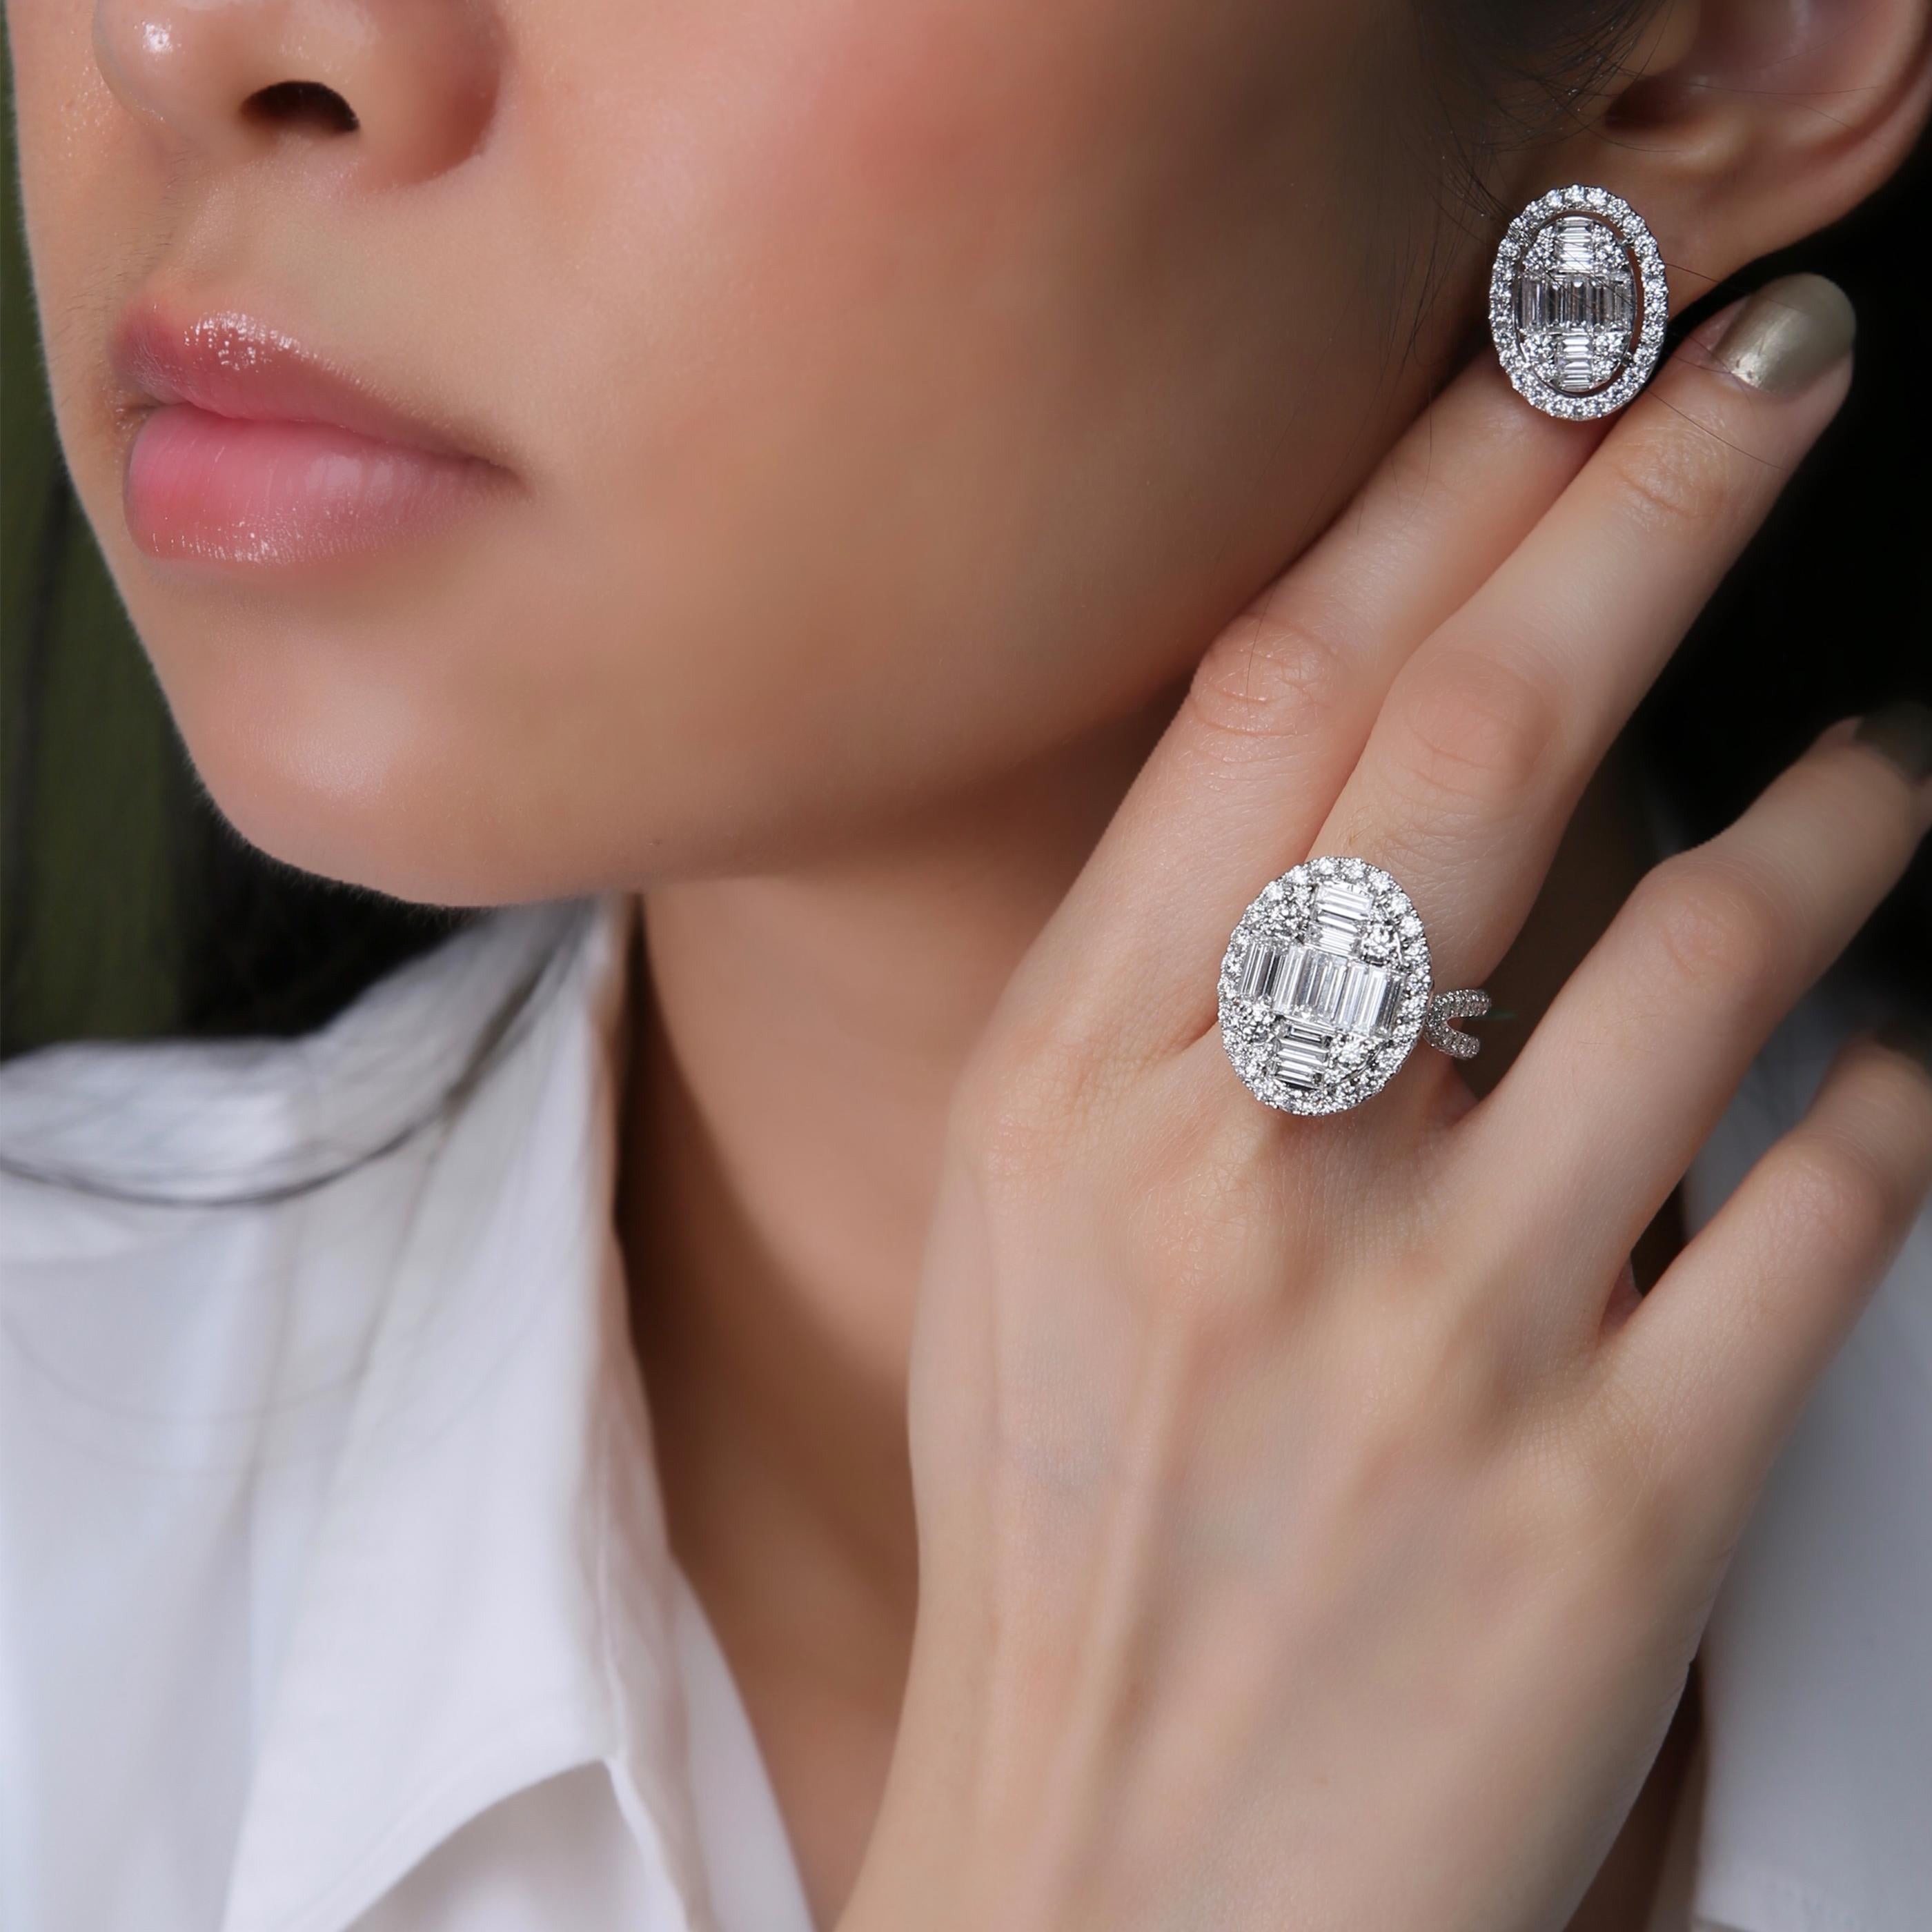 This medium diamond earring and ring set is crafted in 18-karat white gold, weighing approximately 5.86 total carats of SI-V Quality white diamonds. The ring is comfortable and can be sized 